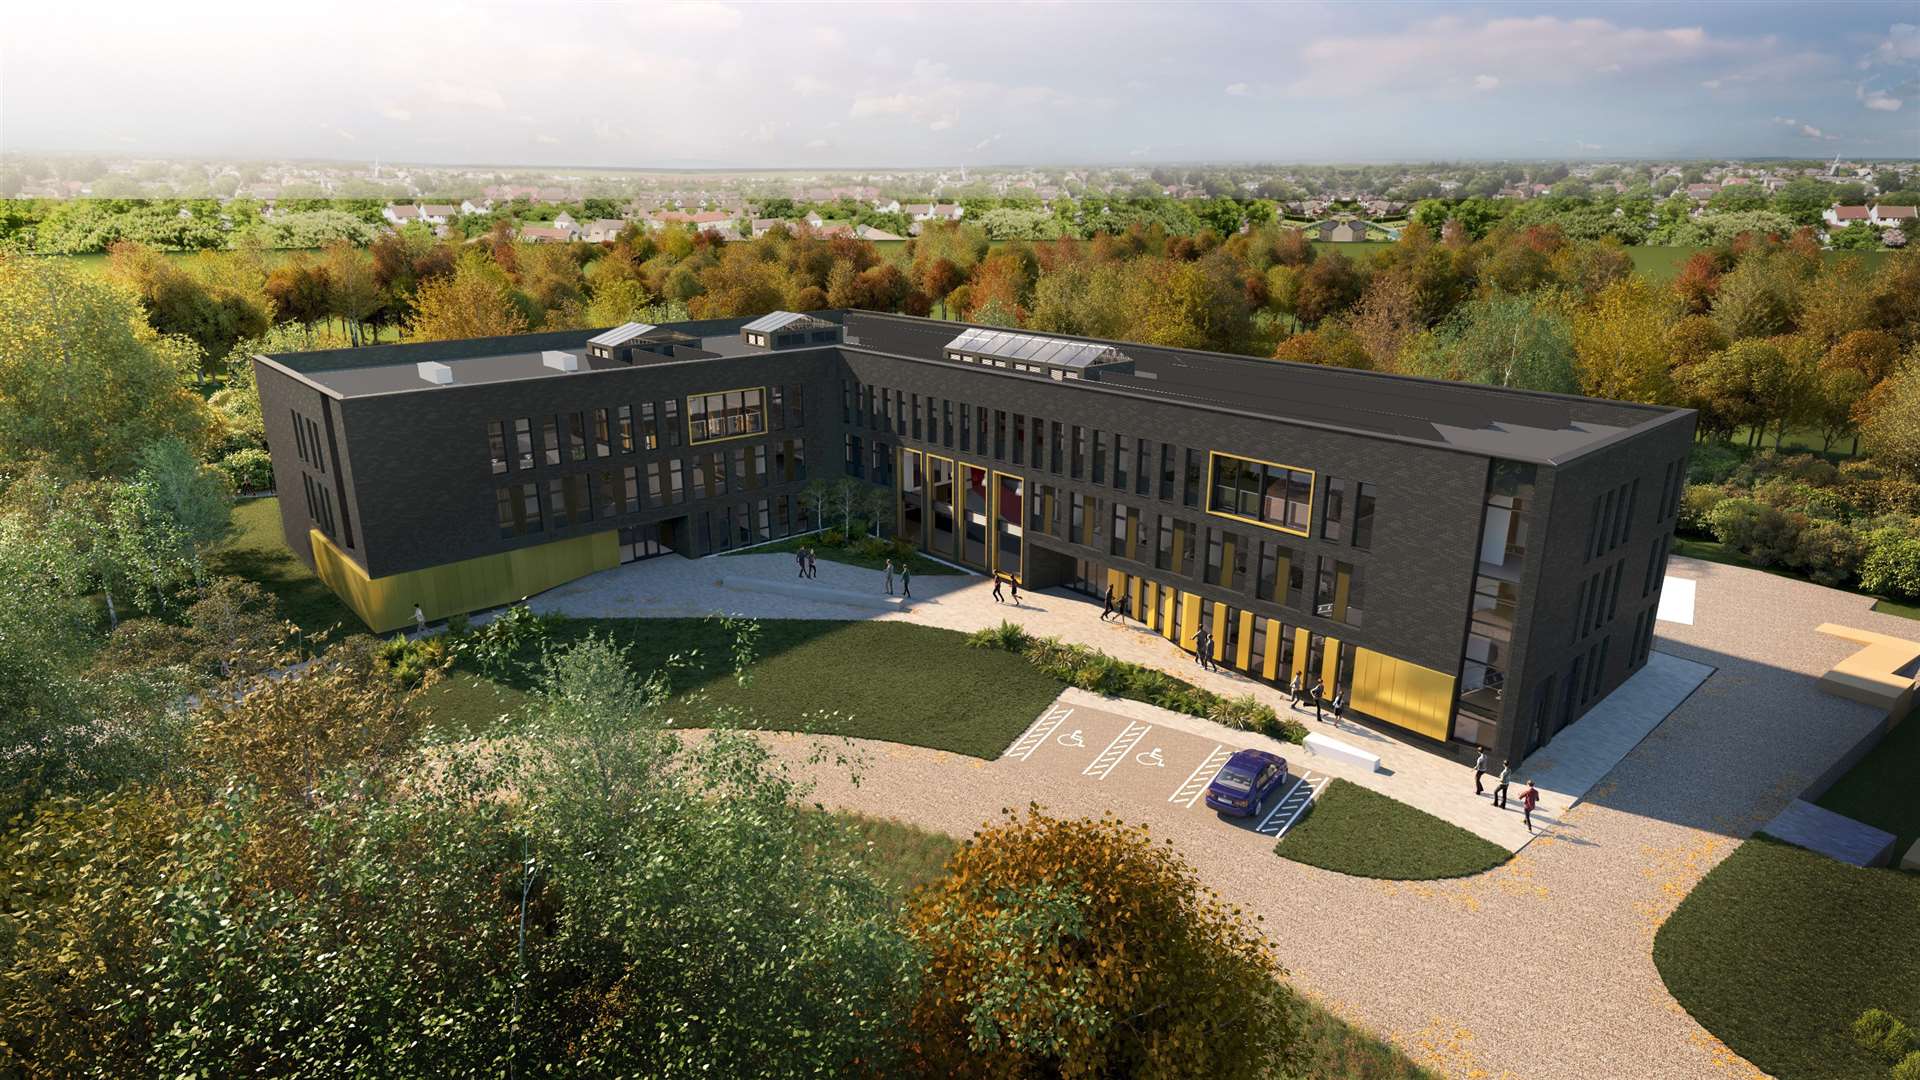 Willmott Dixon has been awarded a £13.4m contract to build a new School of Economics for the University of Kent